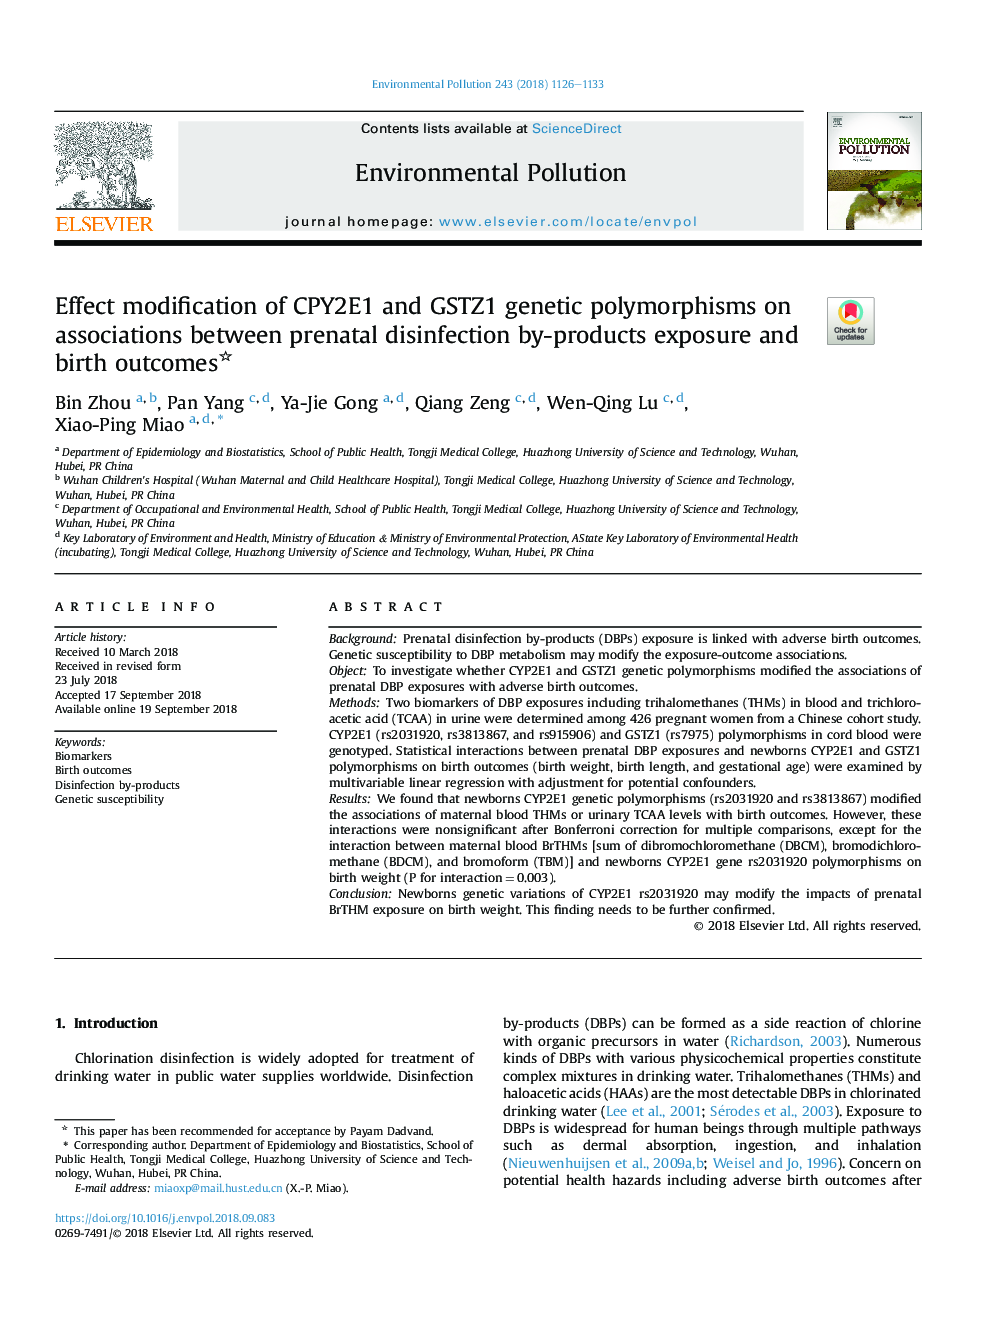 Effect modification of CPY2E1 and GSTZ1 genetic polymorphisms on associations between prenatal disinfection by-products exposure and birth outcomes